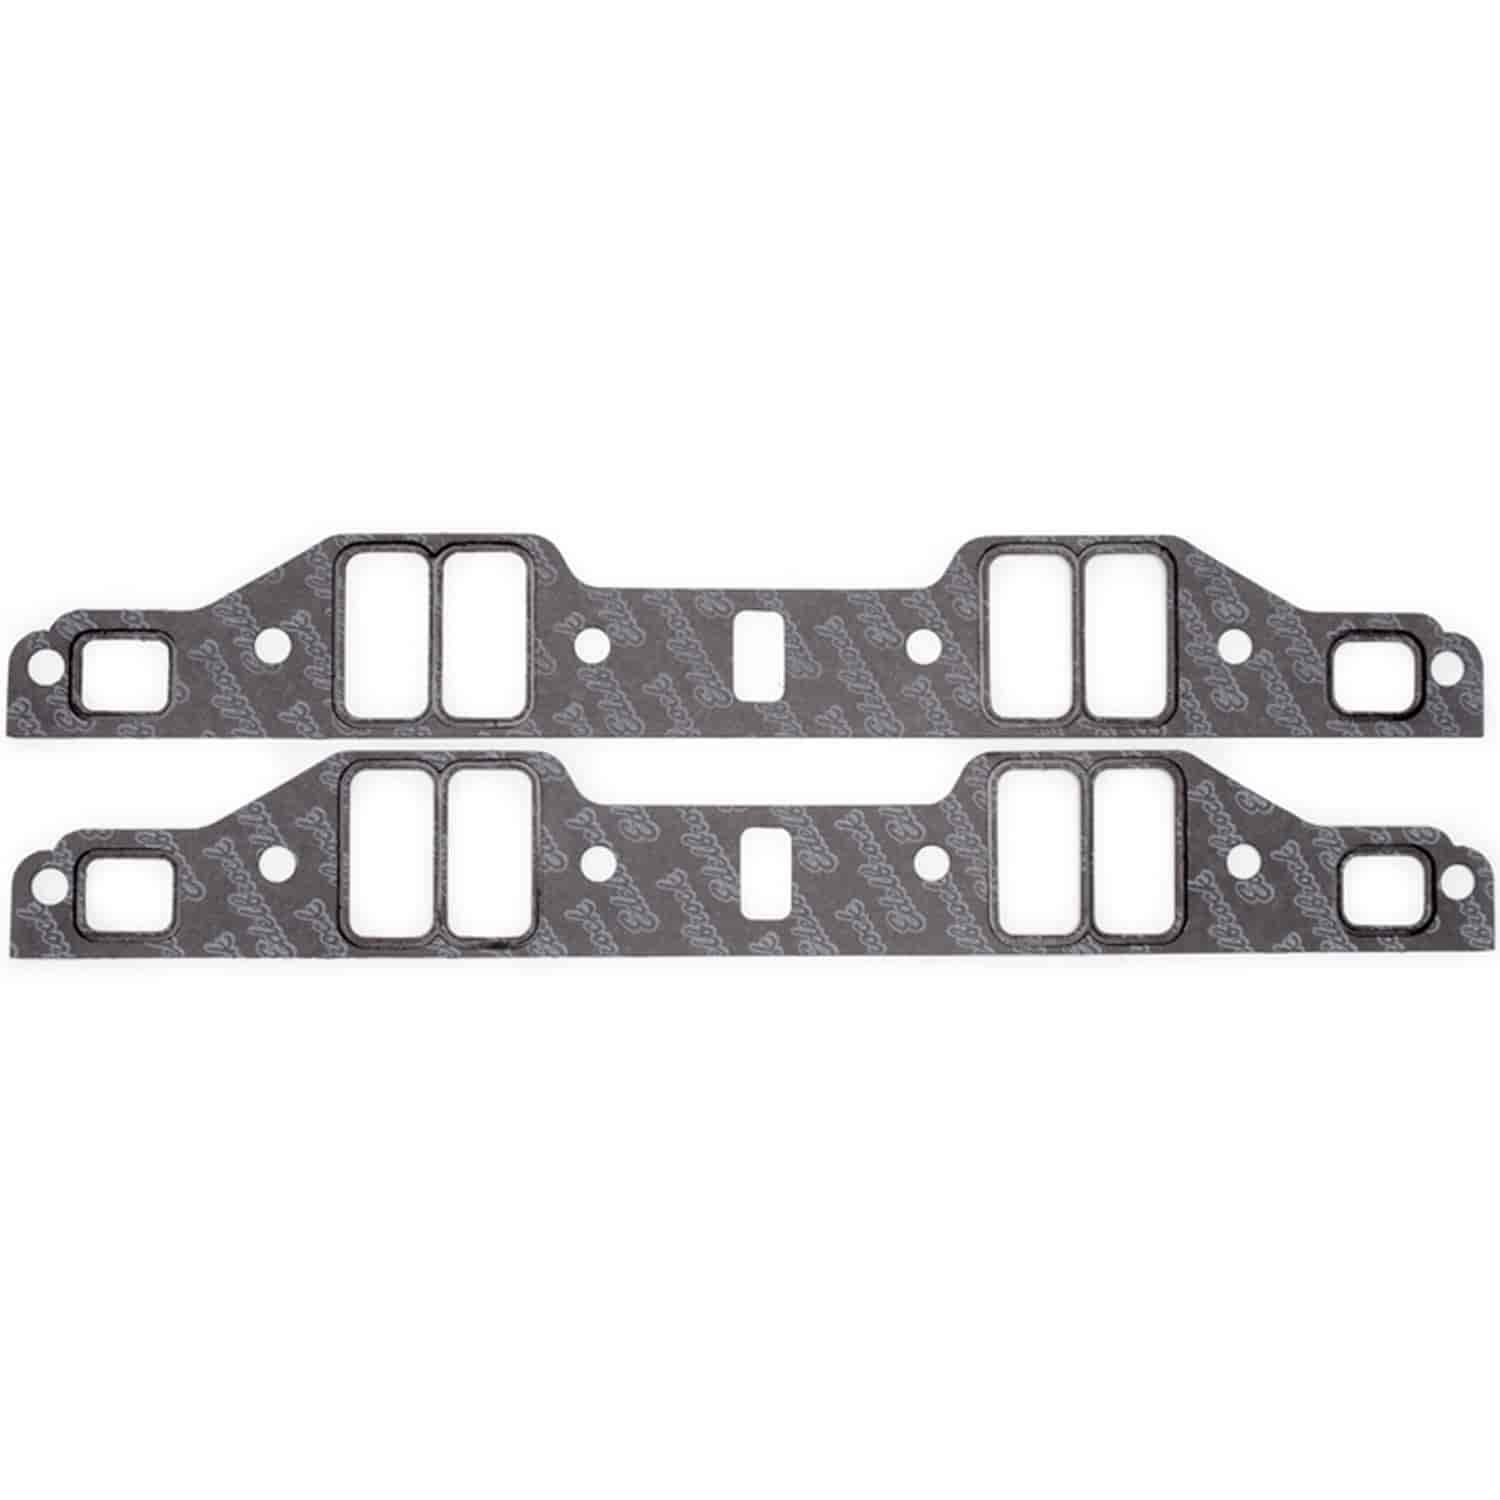 Intake Gaskets for Small Block Chysler 318-360